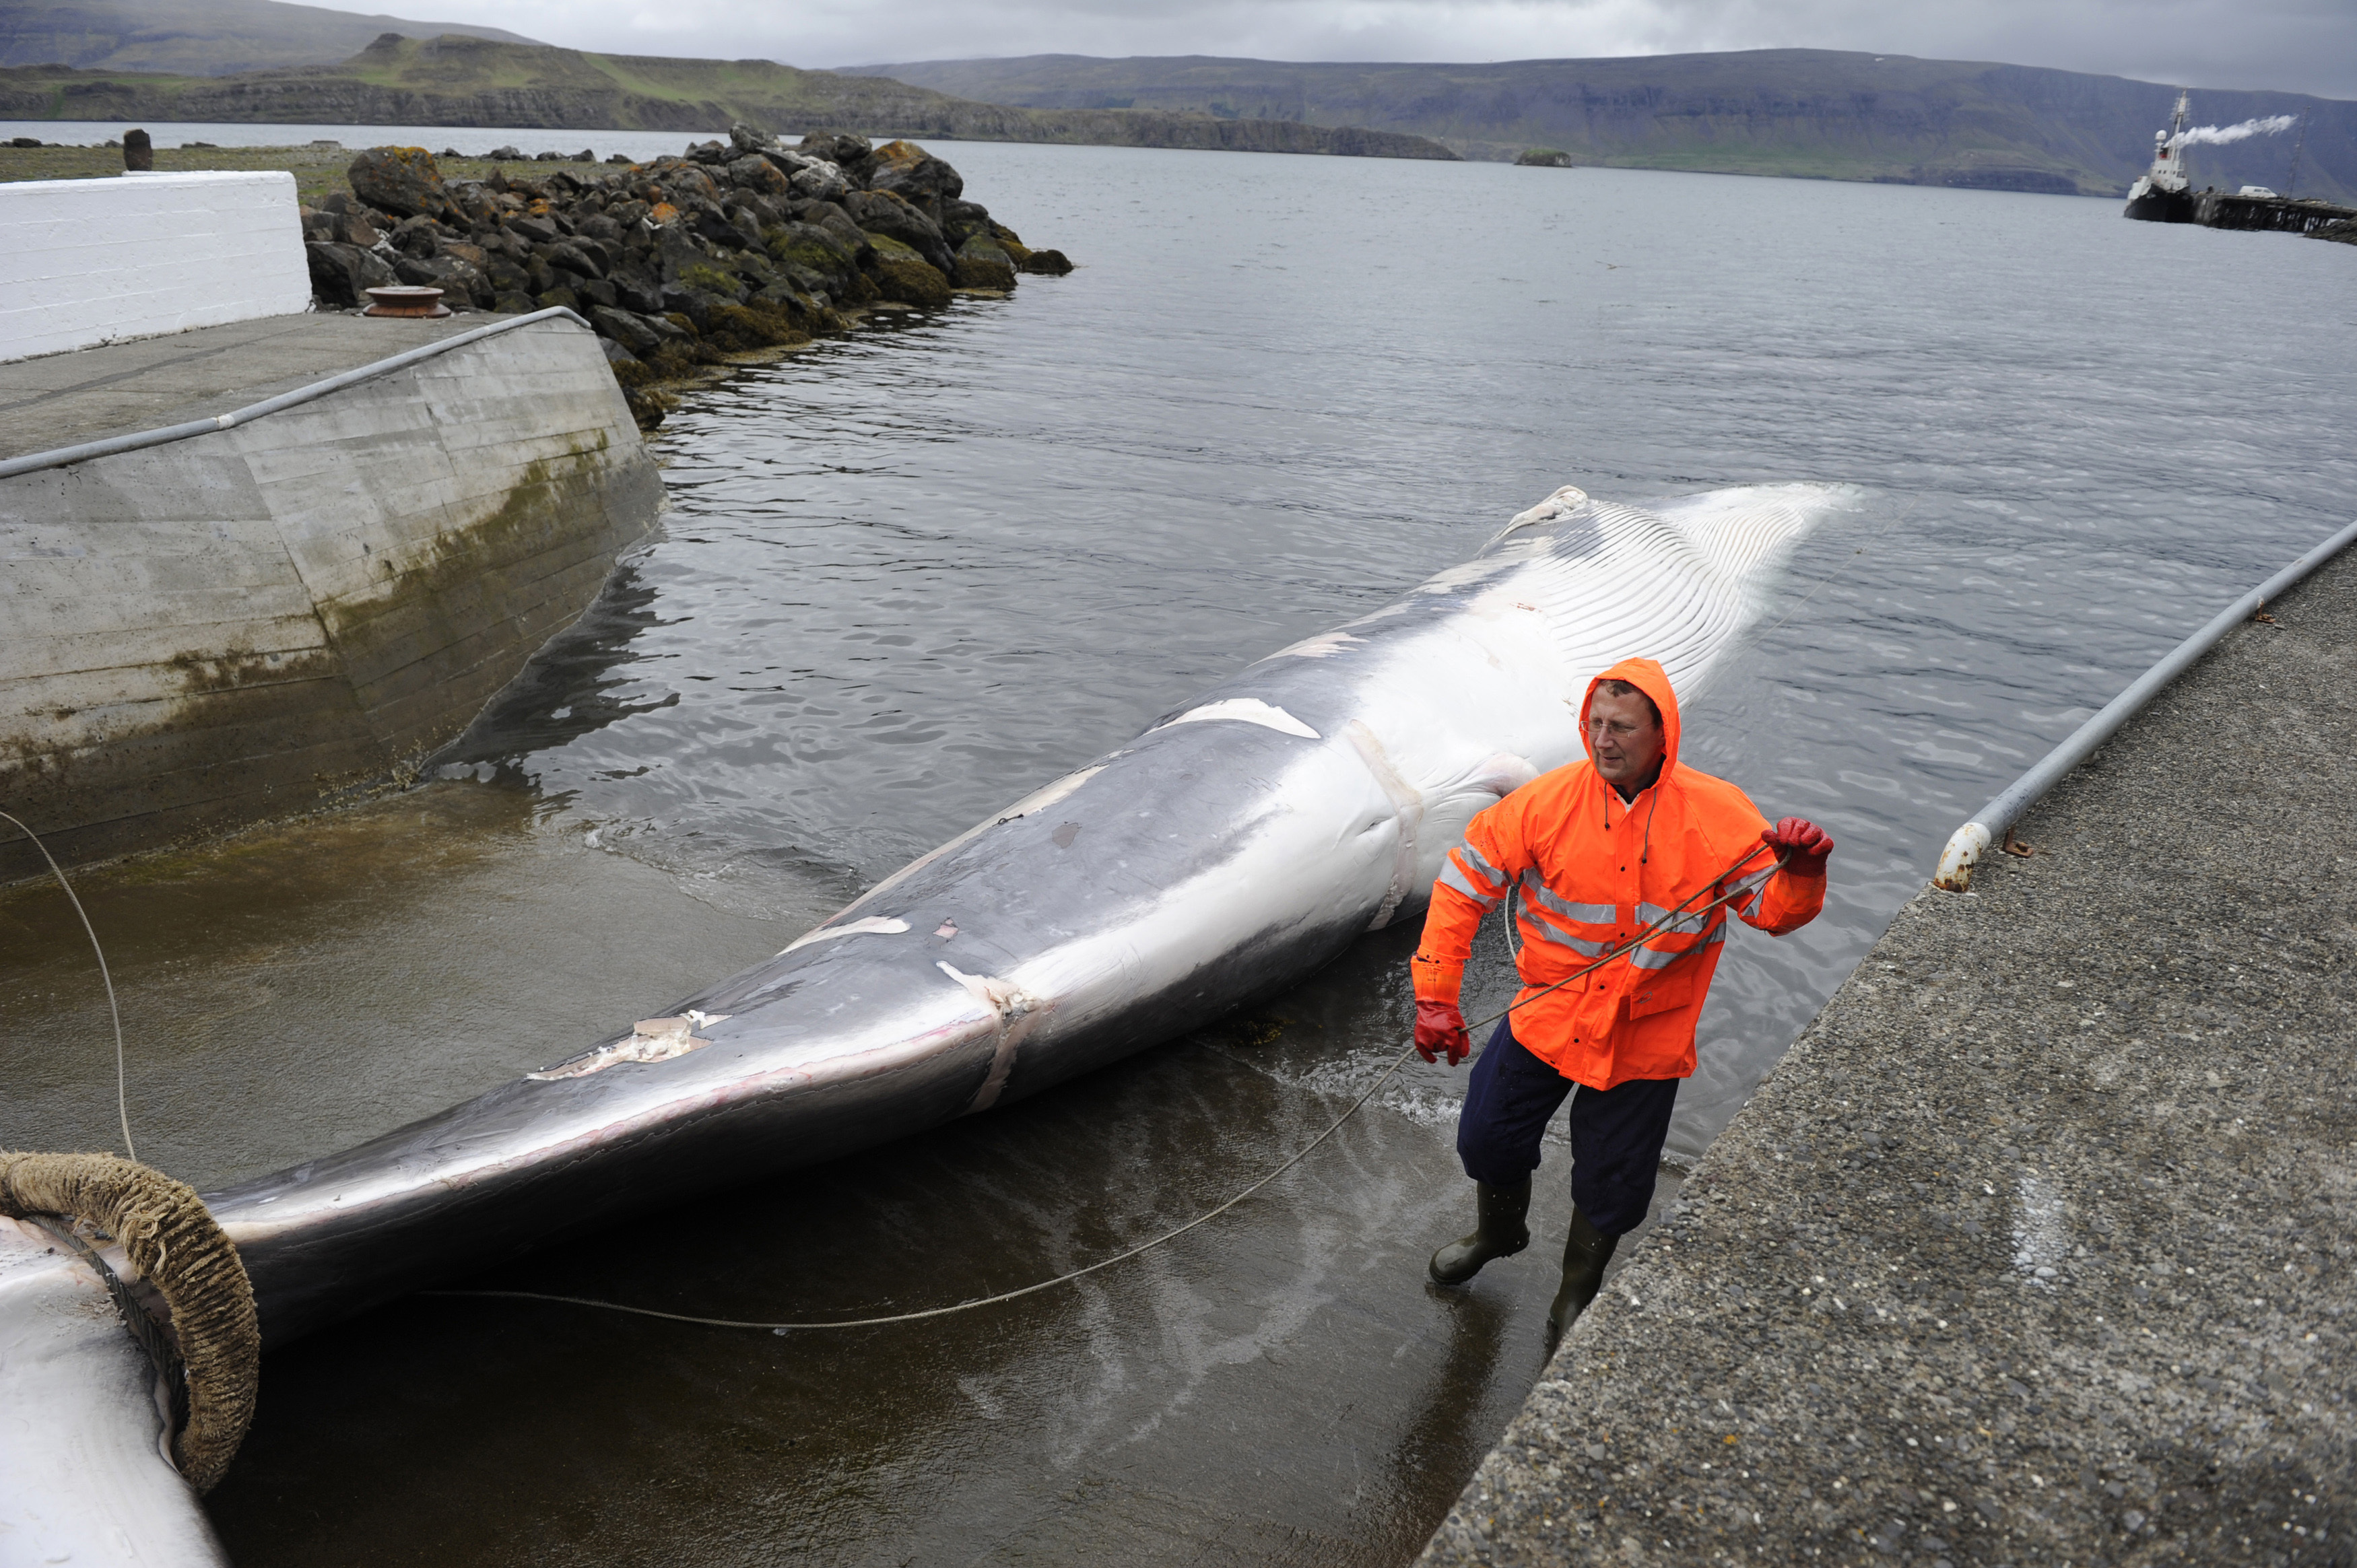 A man stands near a finwhale being towed to a port in Reykjavik